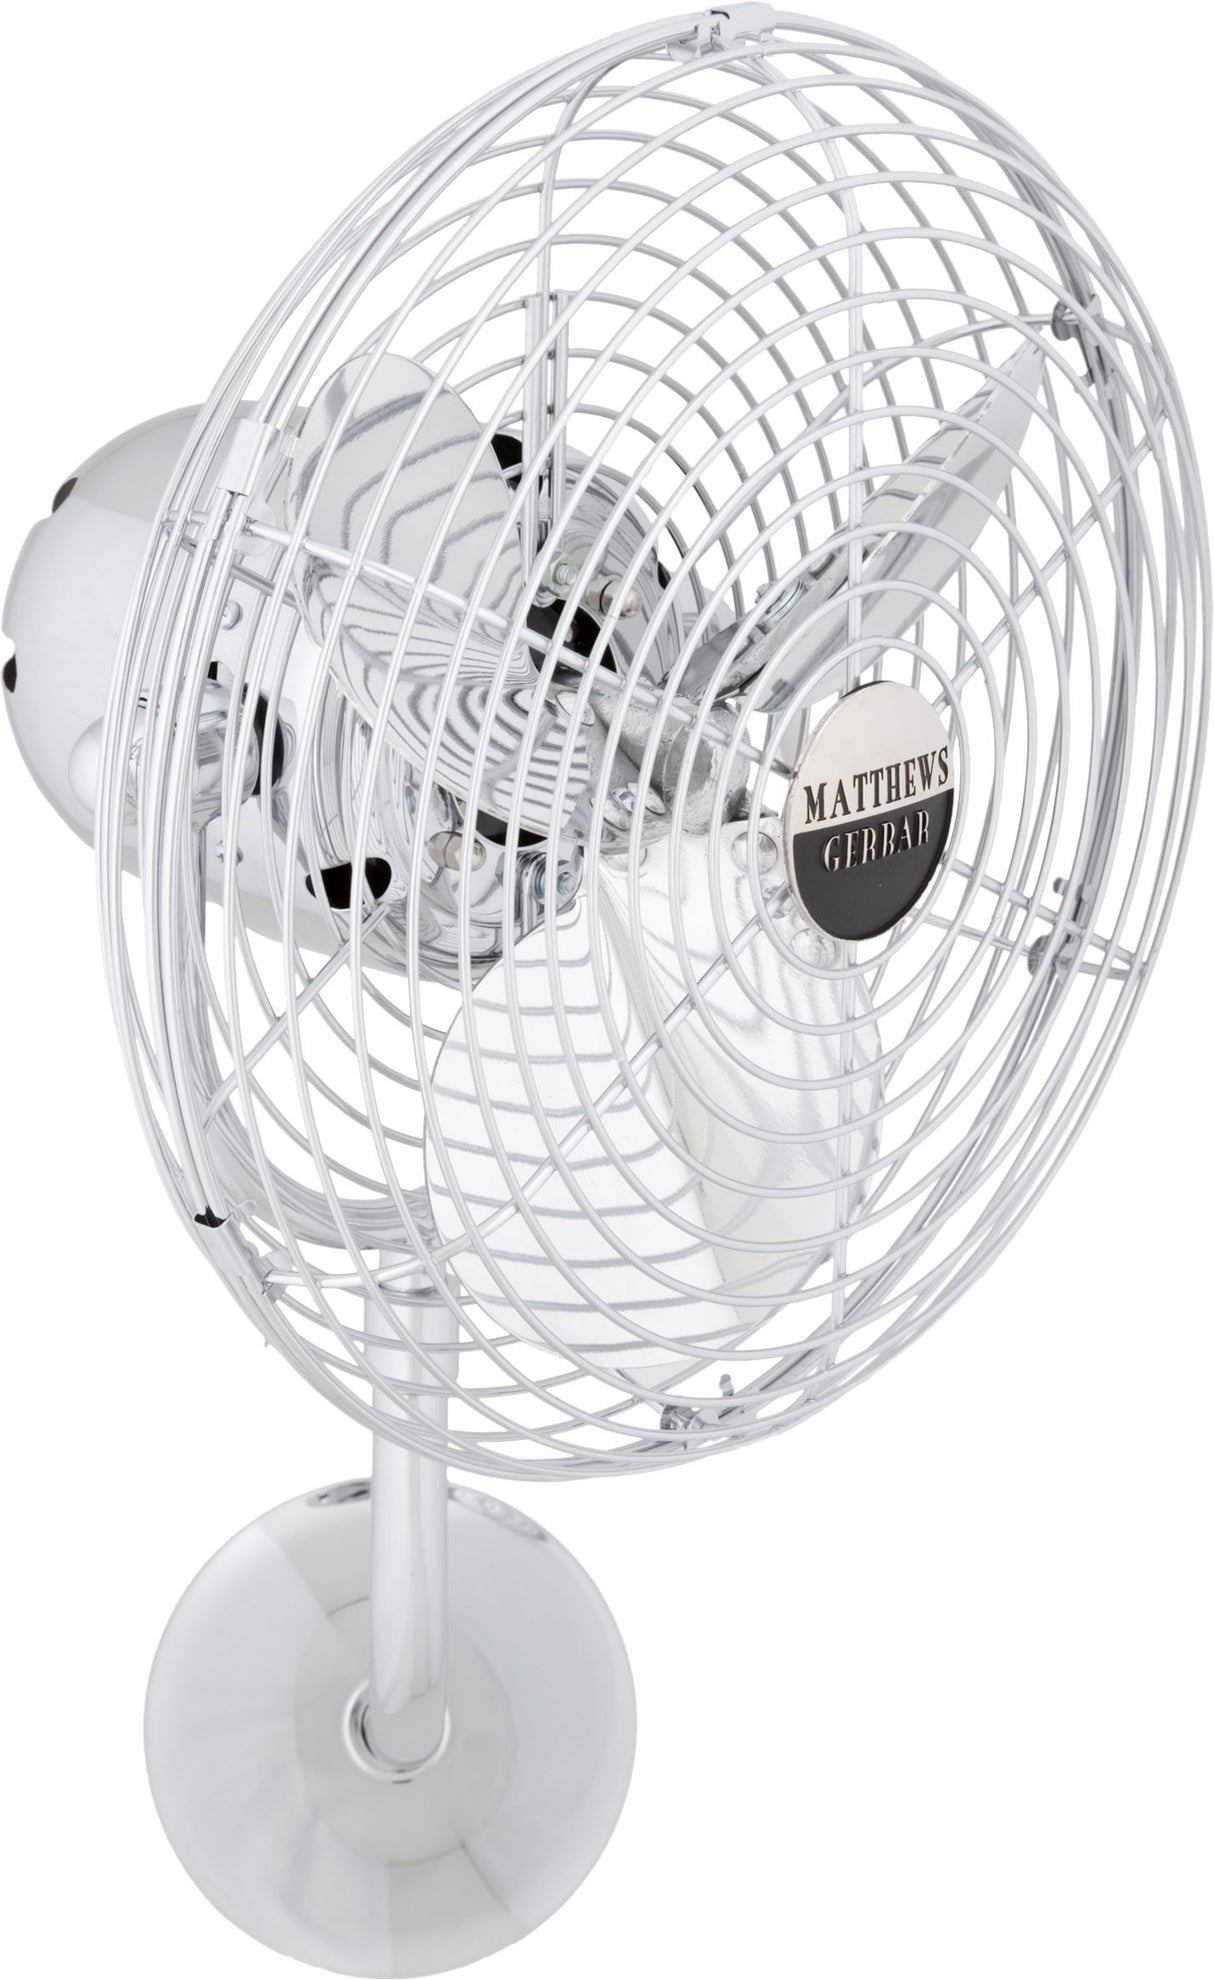 Matthews Fan MP-CR-MTL-DAMP Michelle Parede vintage style wall fan in polished chrome finish. Optimized for damp locations.